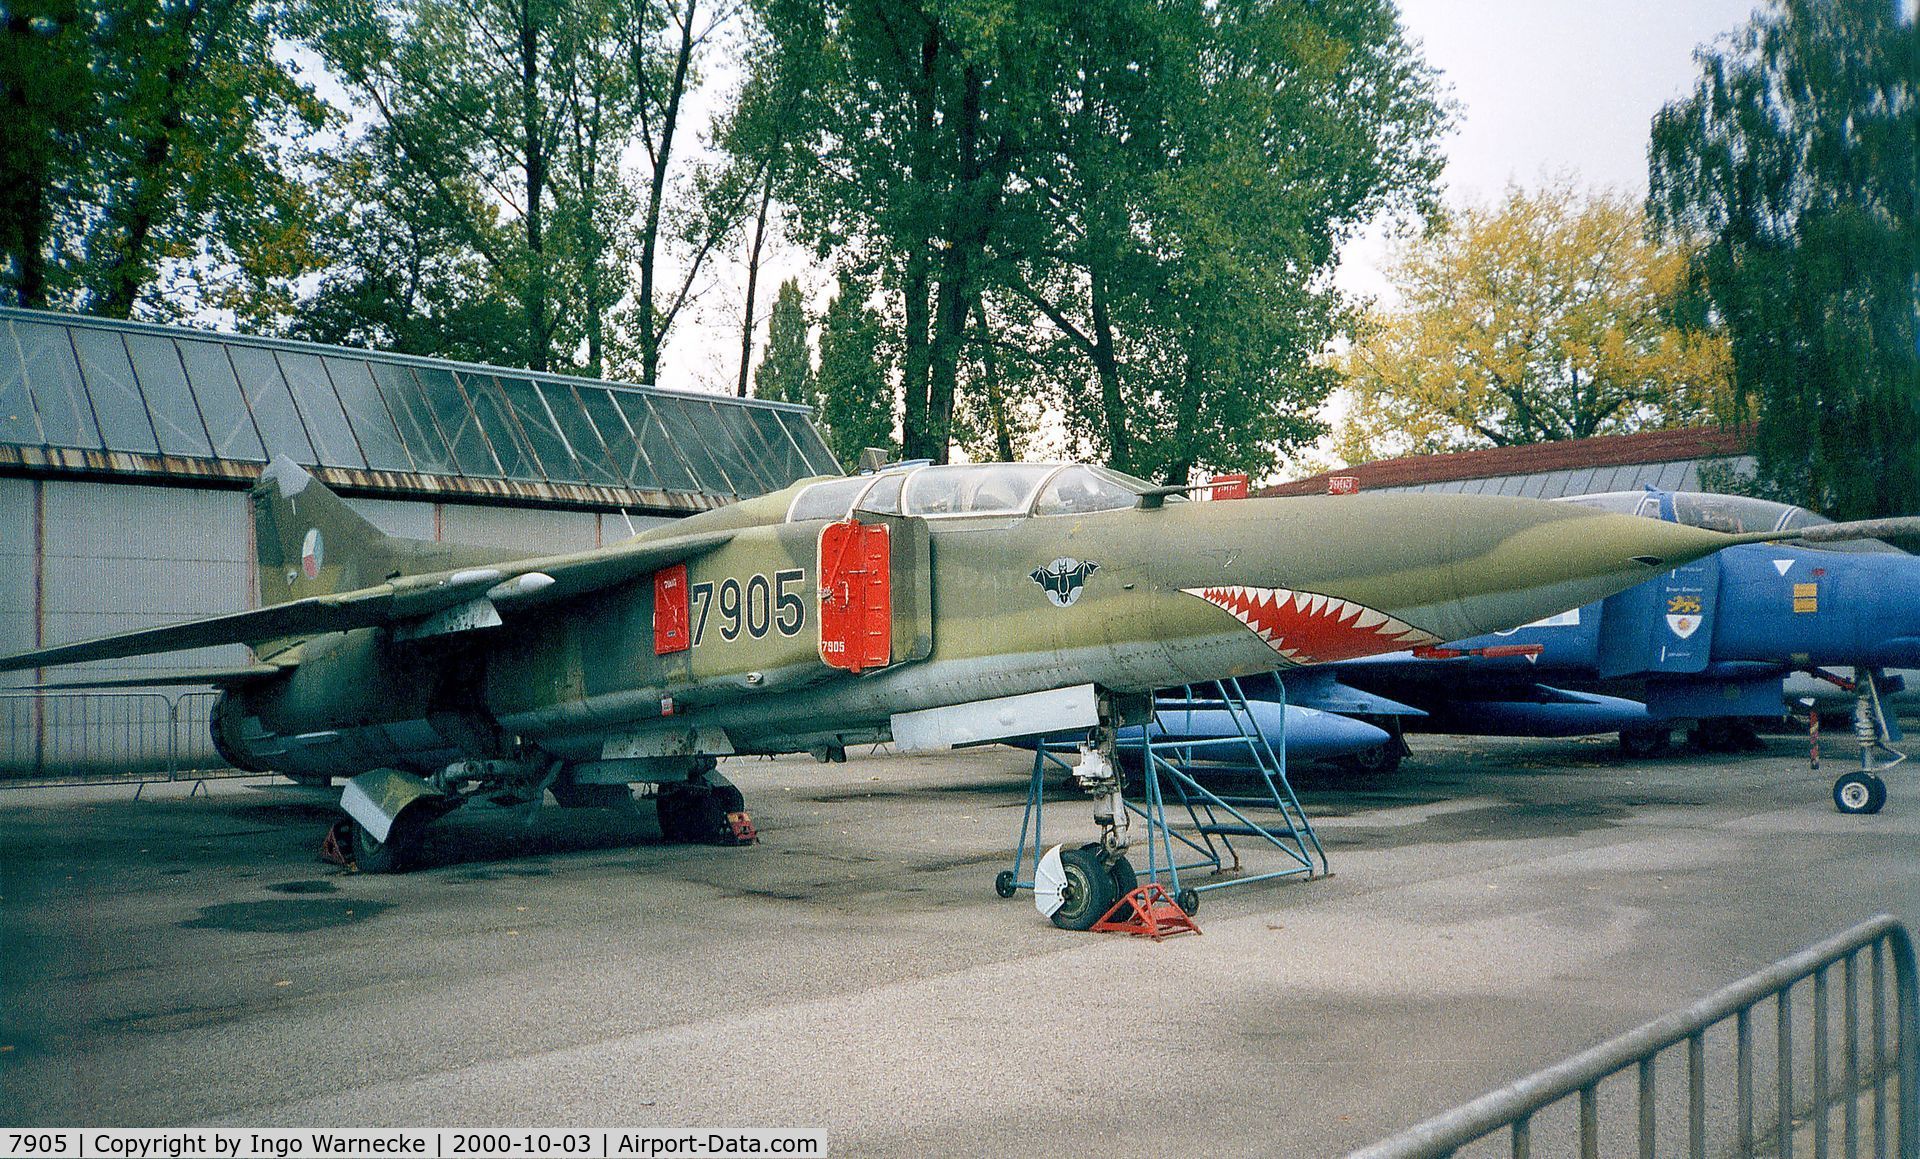 7905, 1979 Mikoyan-Gurevich MiG-23UB C/N A1037905s, Mikoyan i Gurevich MiG-23UB FLOGGER-C of the czechoslovak air force at the Letecke Muzeum, Prague-Kbely